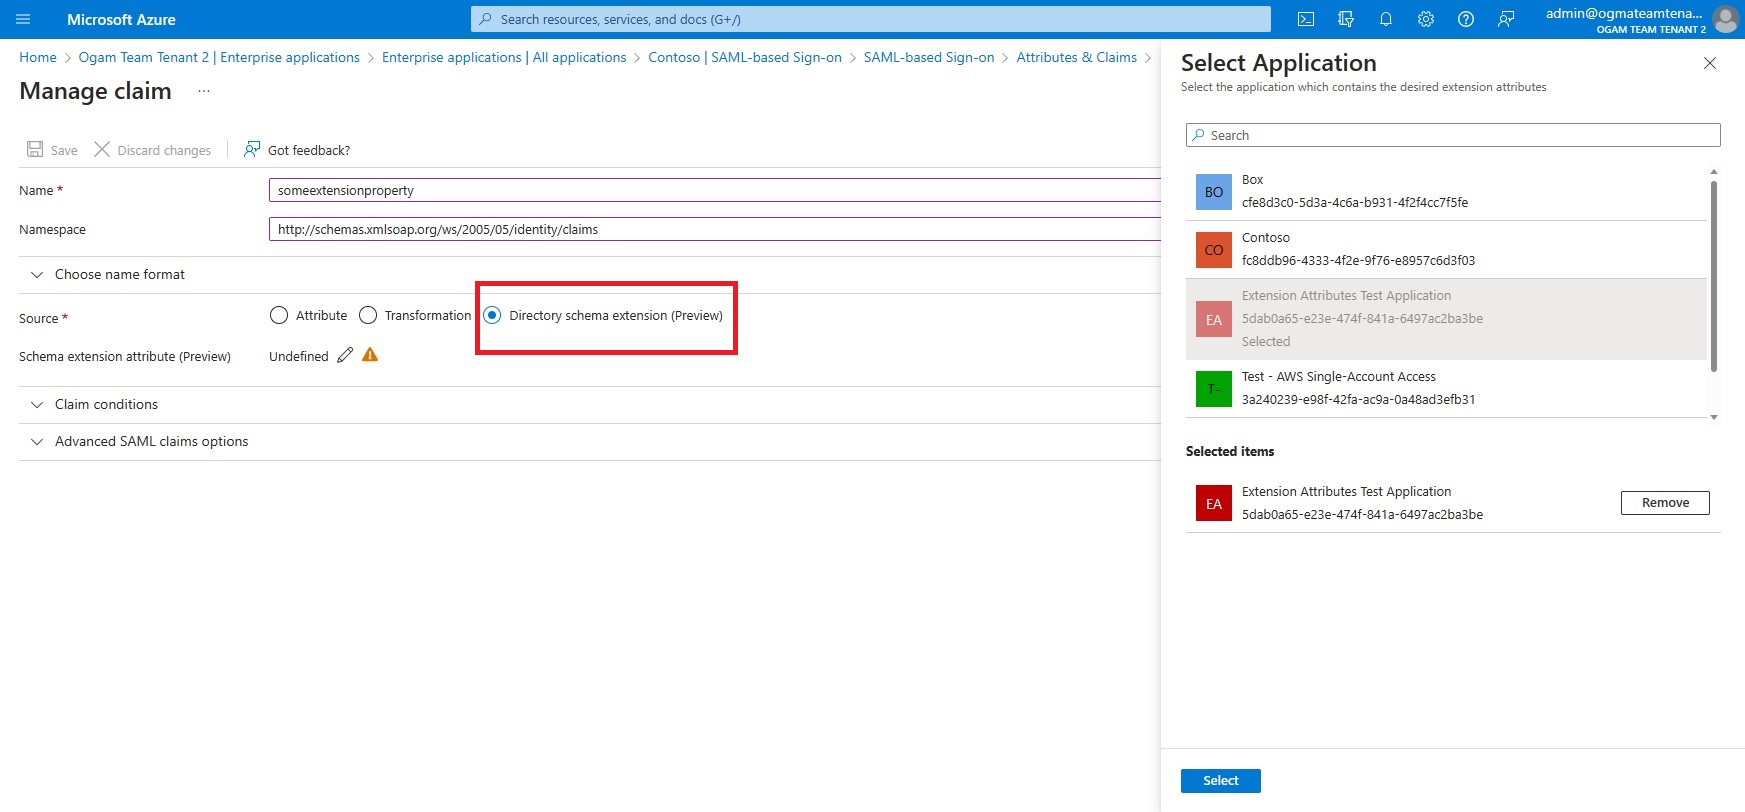 Screenshot of the MultiValue extension configuration section in the Azure portal.